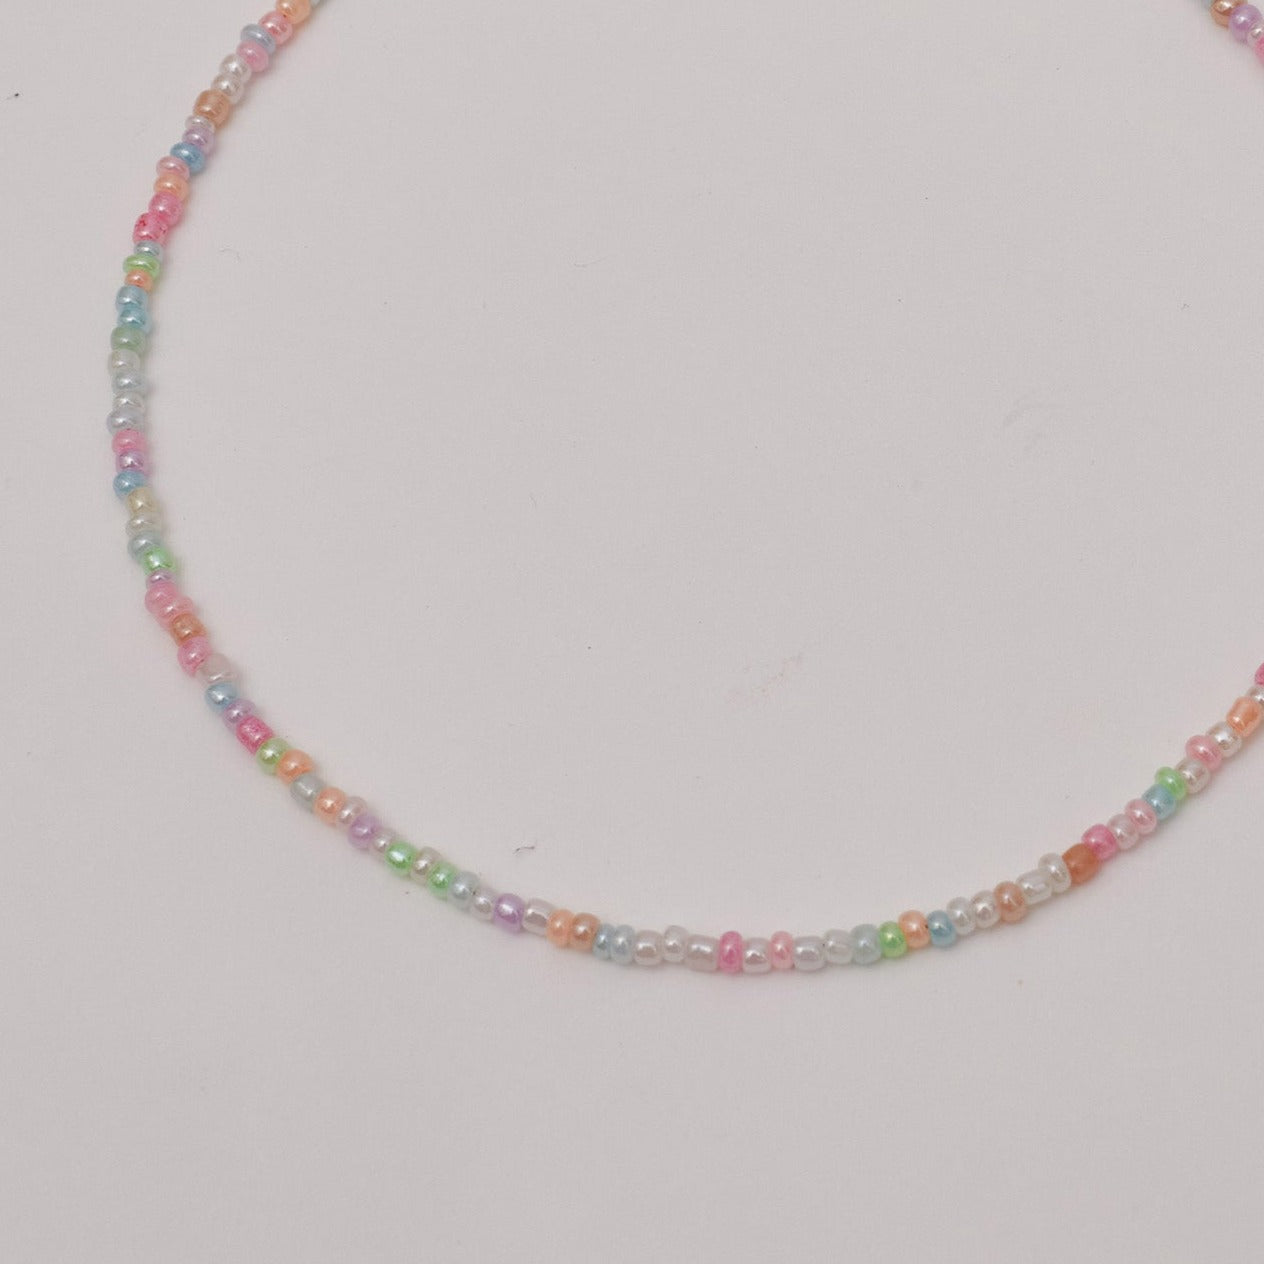 Mini Beaded Necklace Pastel Pink/Blue